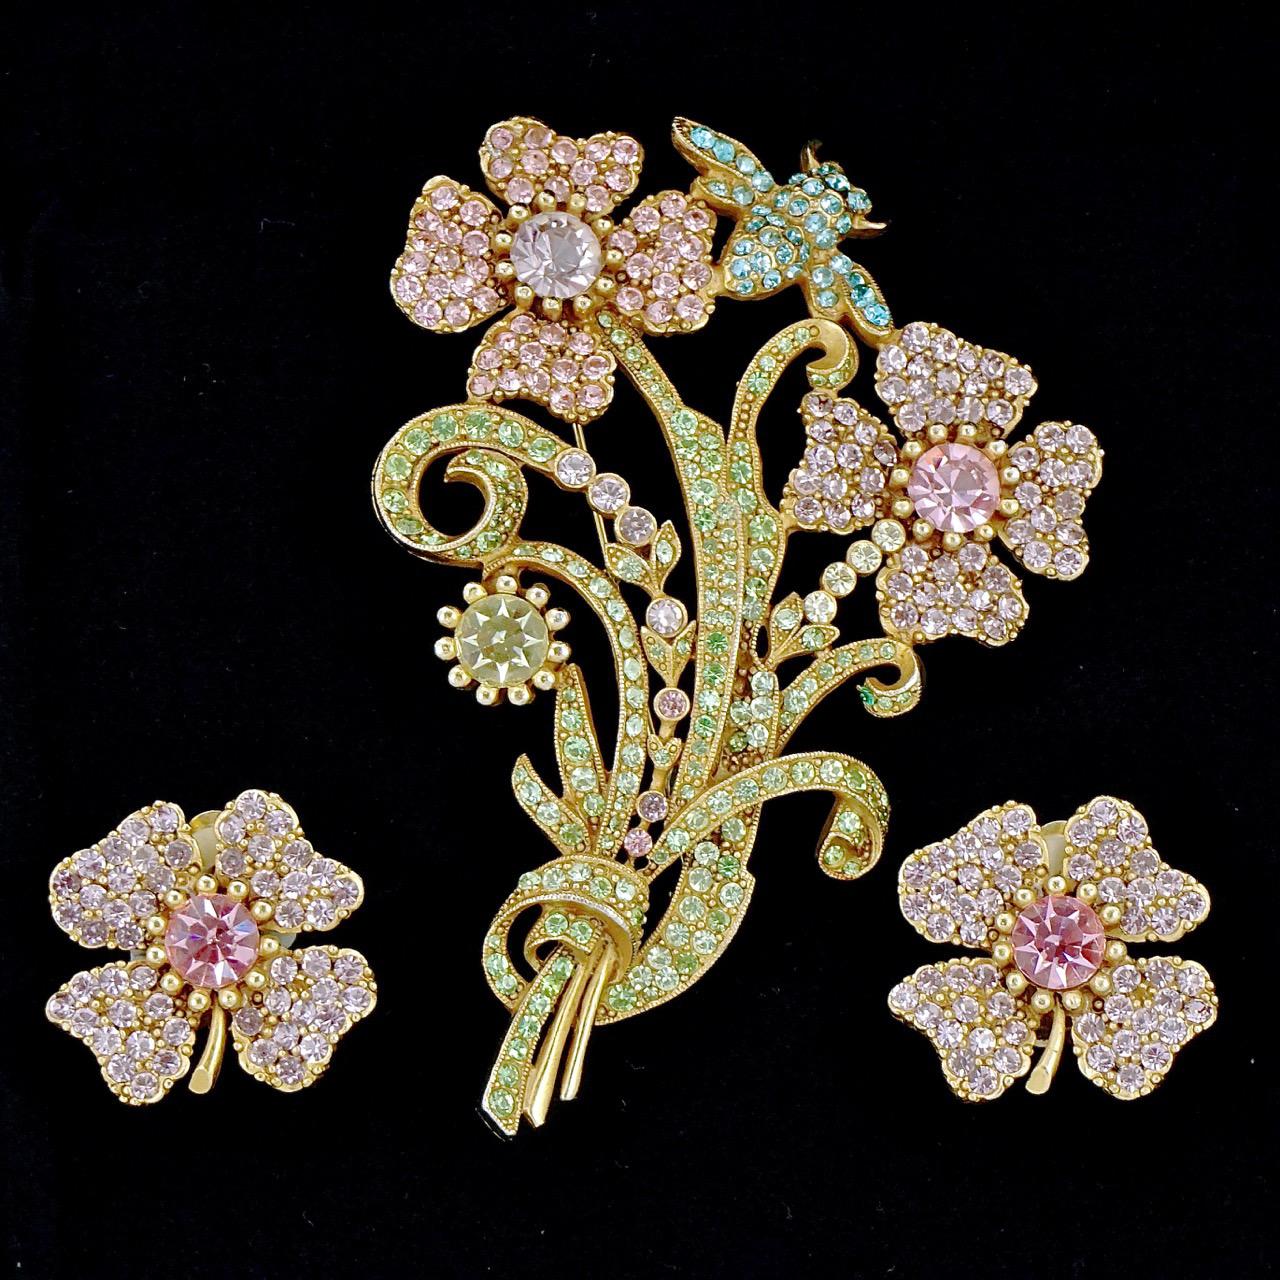 Butler & Wilson Gold Tone Flower Brooch and Earrings with Crystals 2